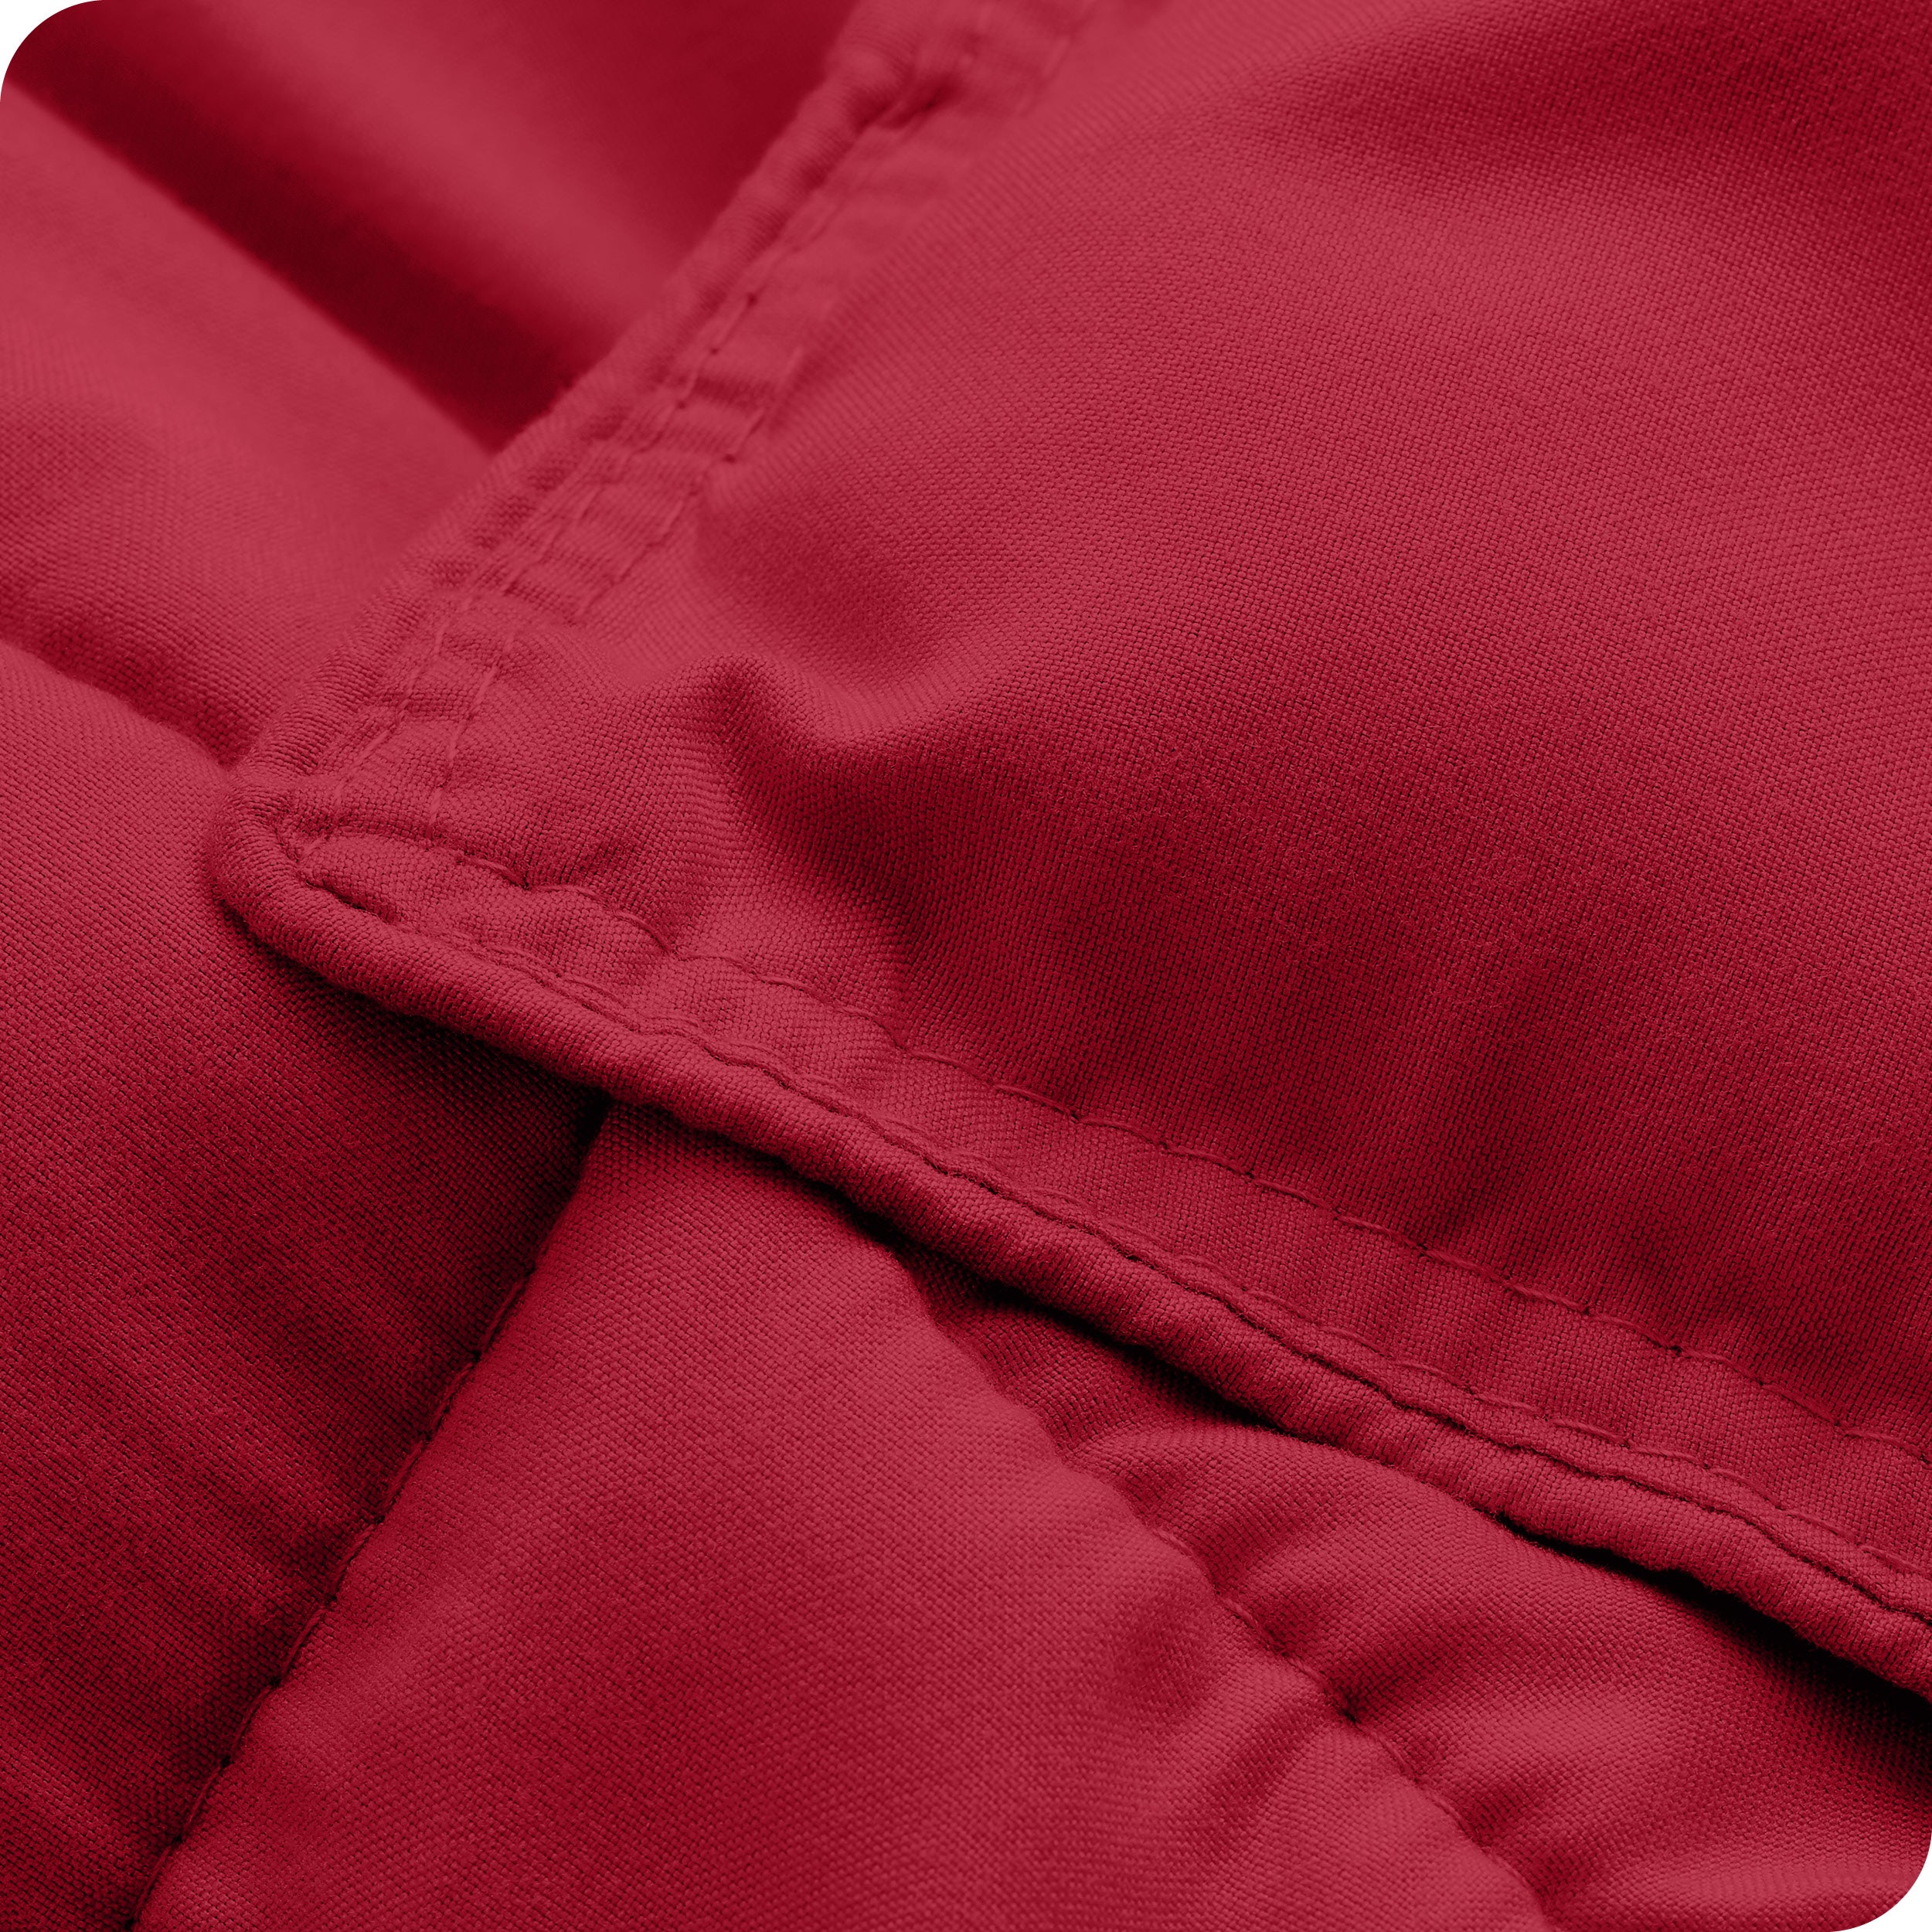 A close up of a corner of the microfiber comforter